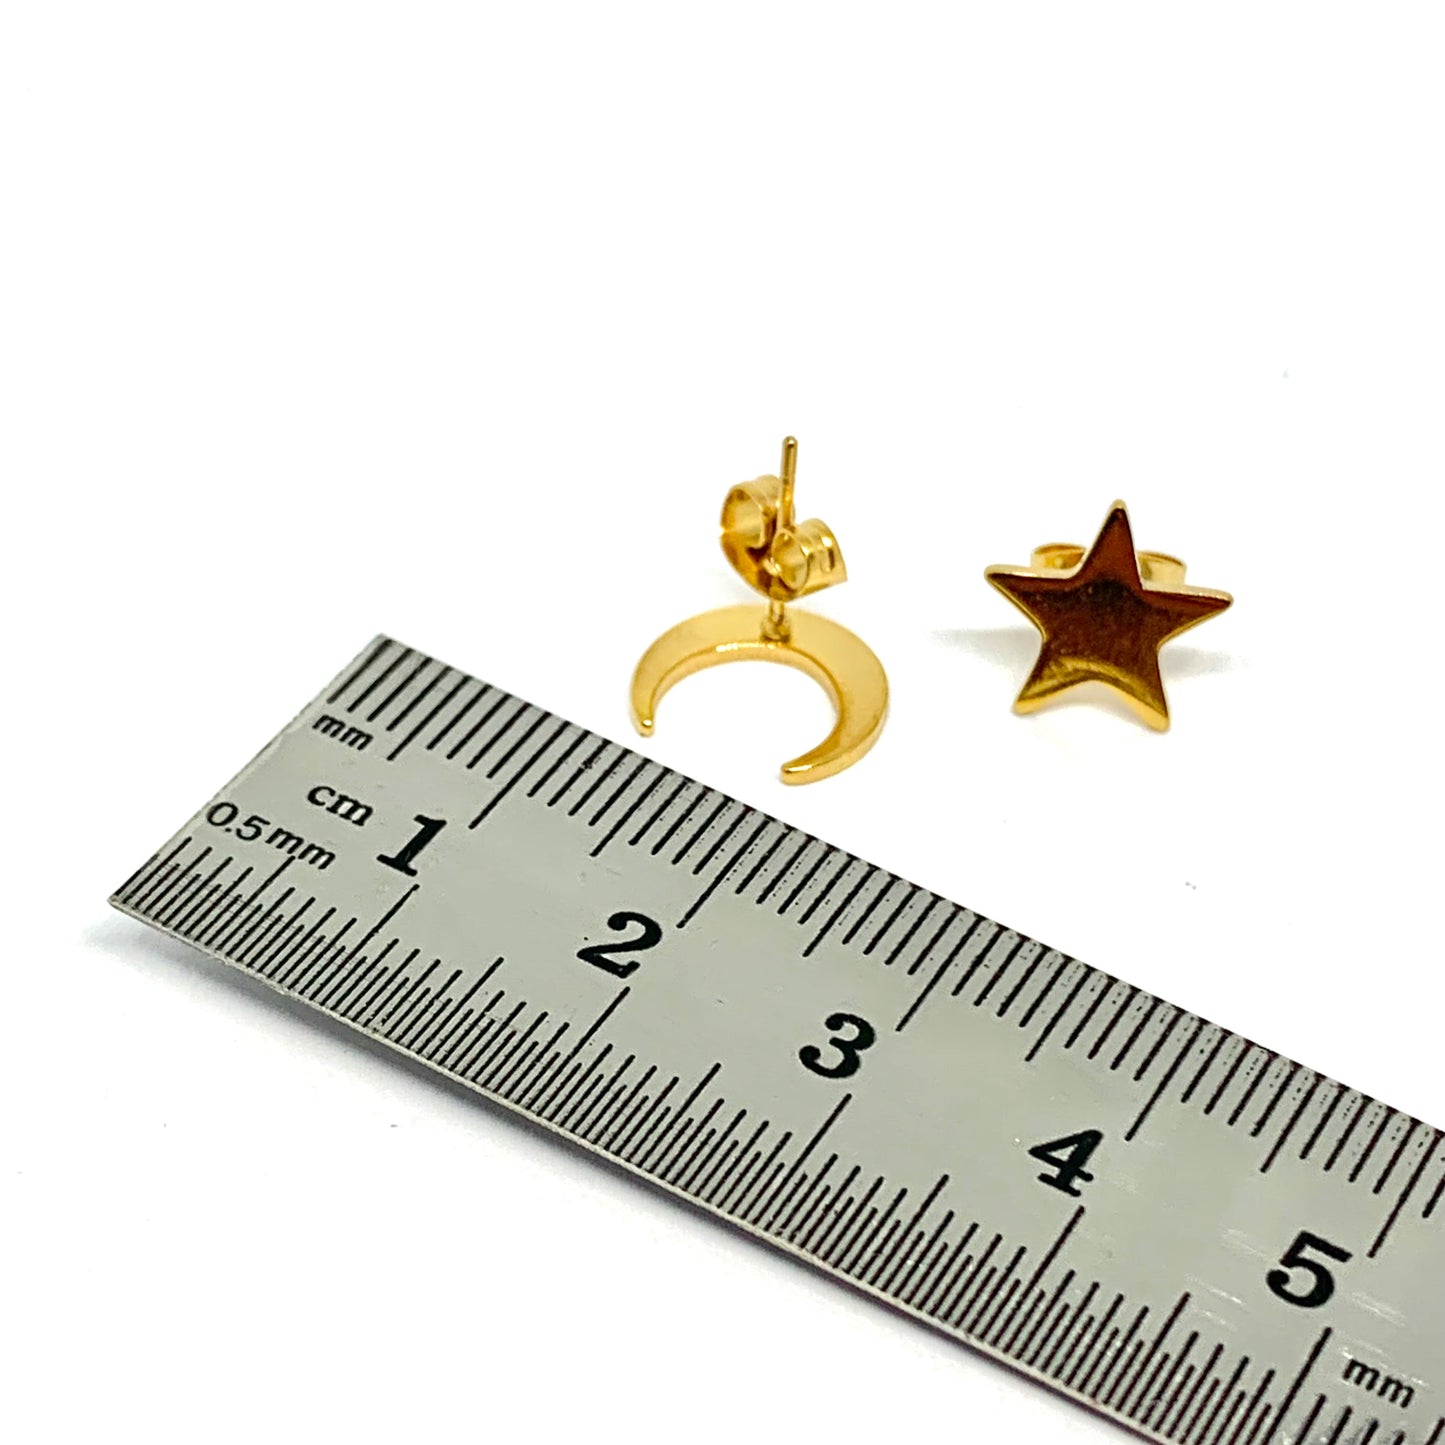 Moon and star gold stud earrings for women and girls. Mexican jewelry inspired by Frida Kahlo. Celestial jewelry. Luna y estrella aretes